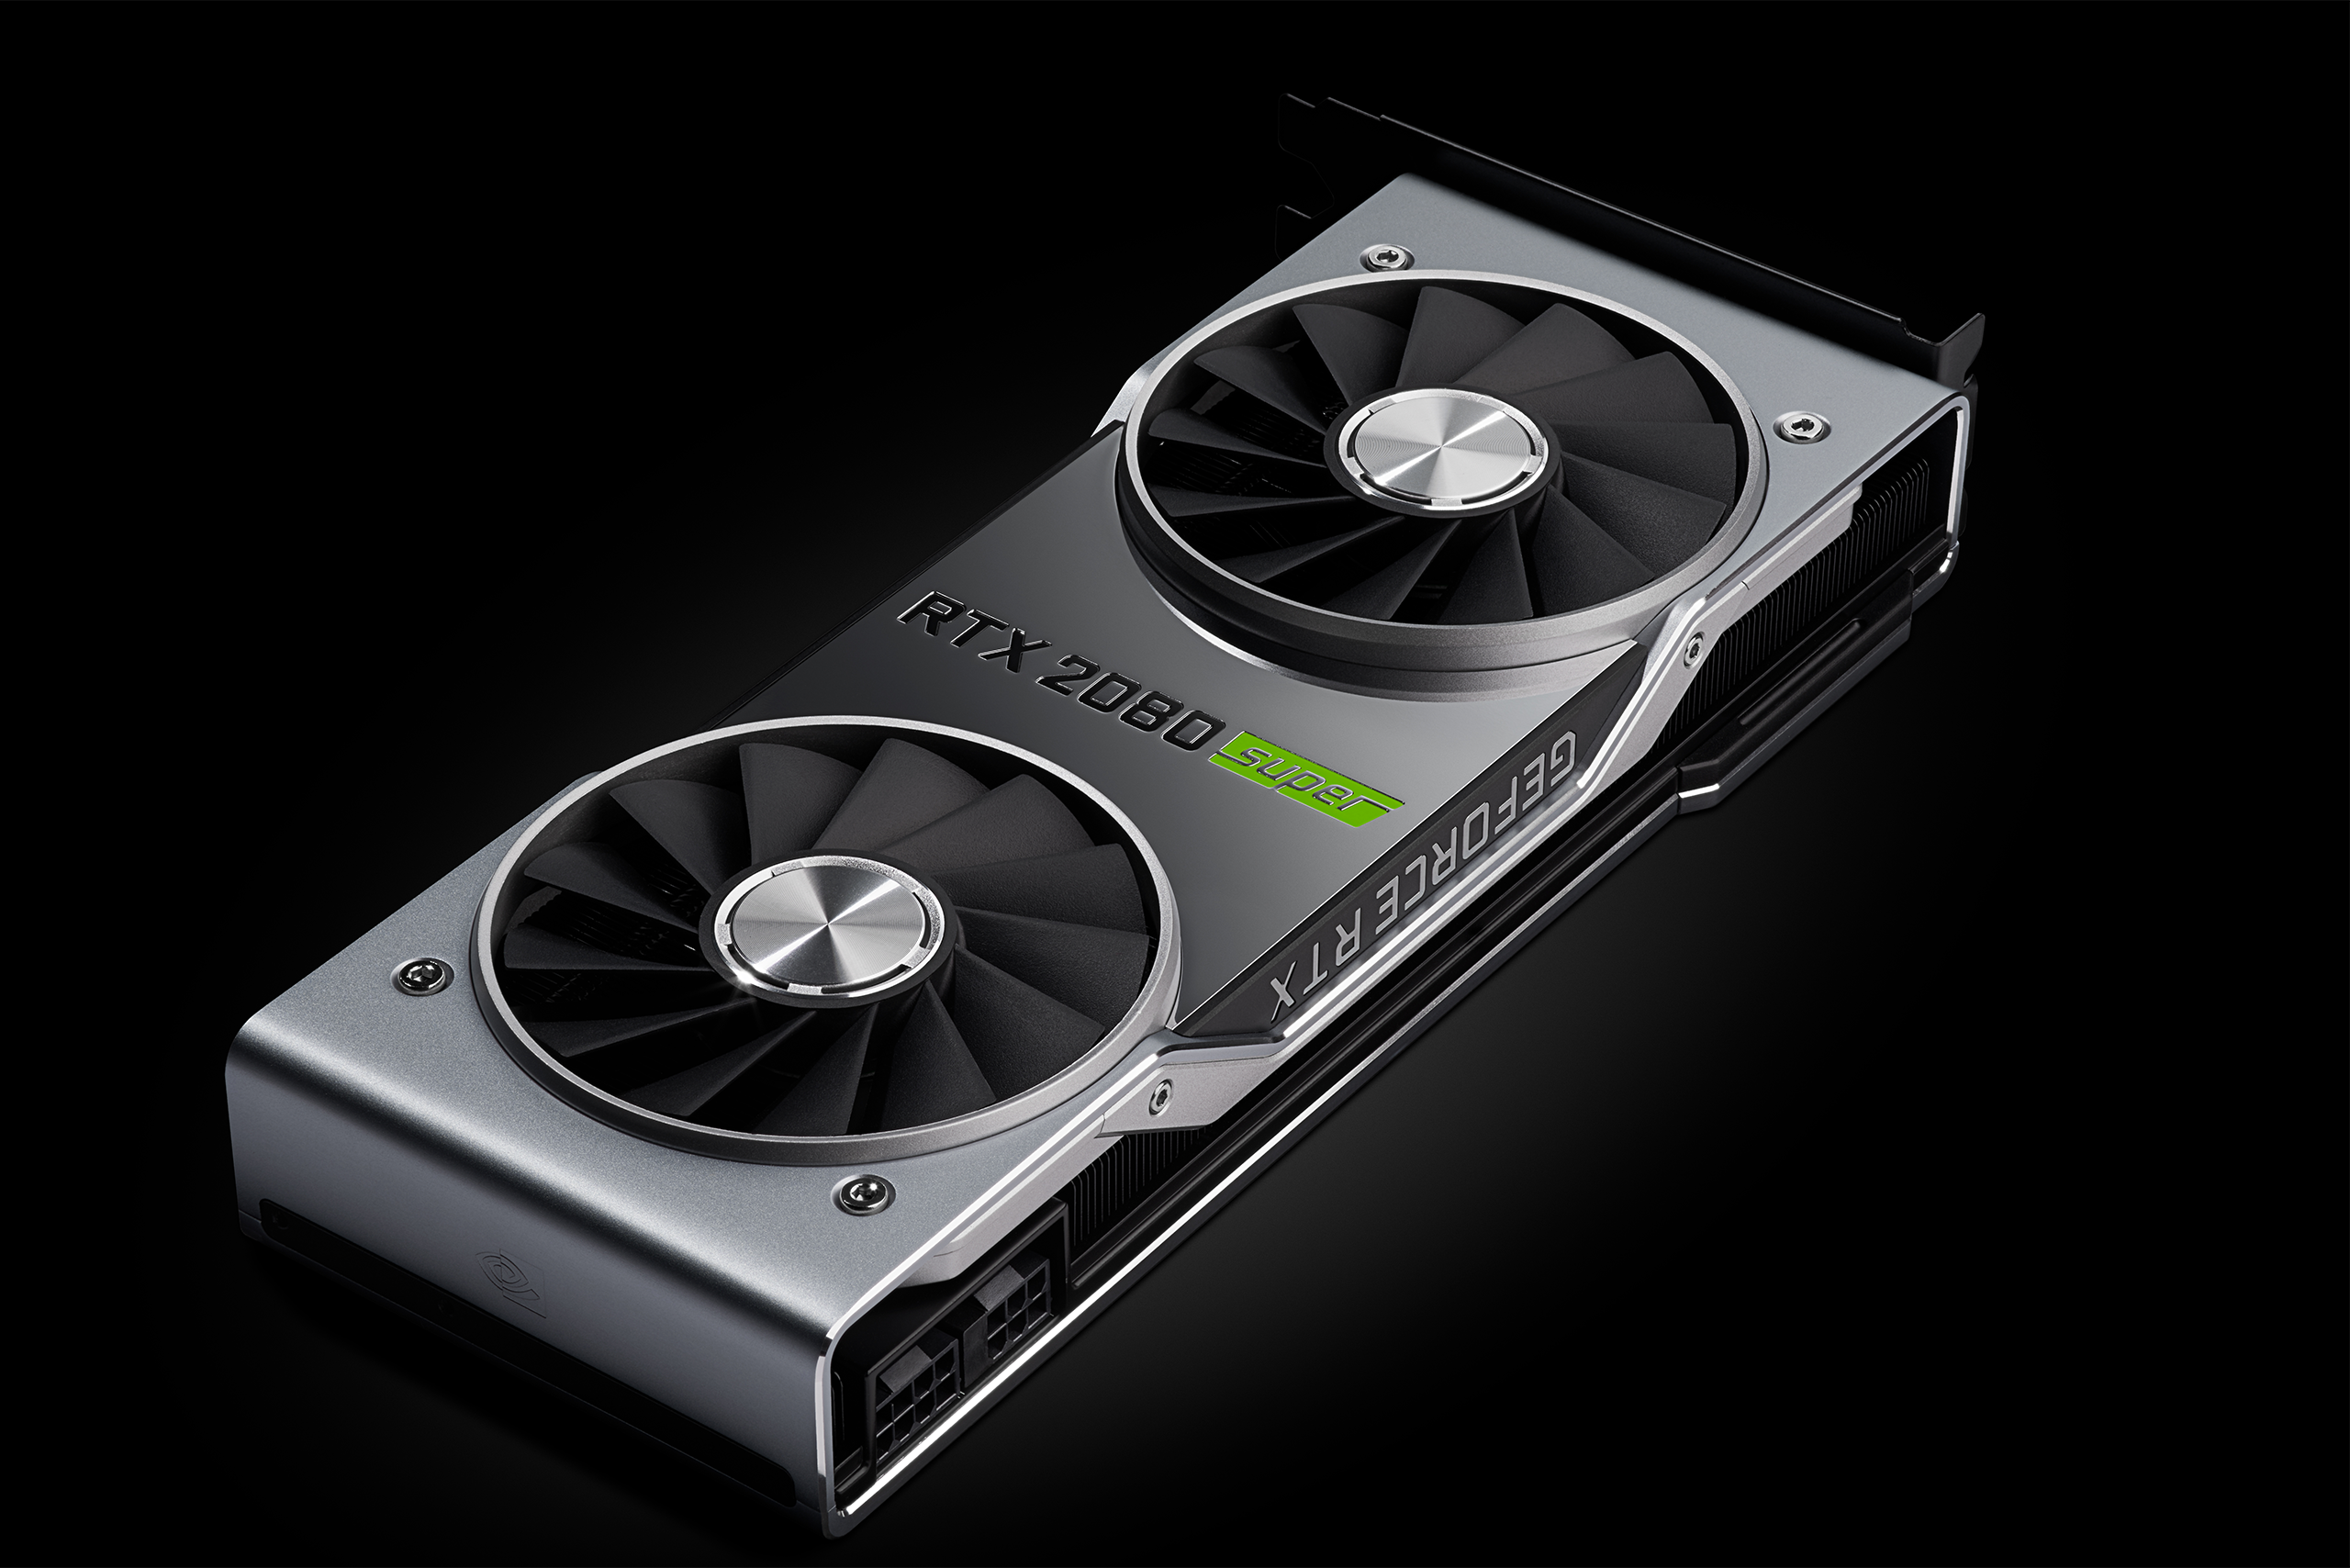 Release of an Nvidia GeForce RTX 2080 Ti SUPER graphics card could